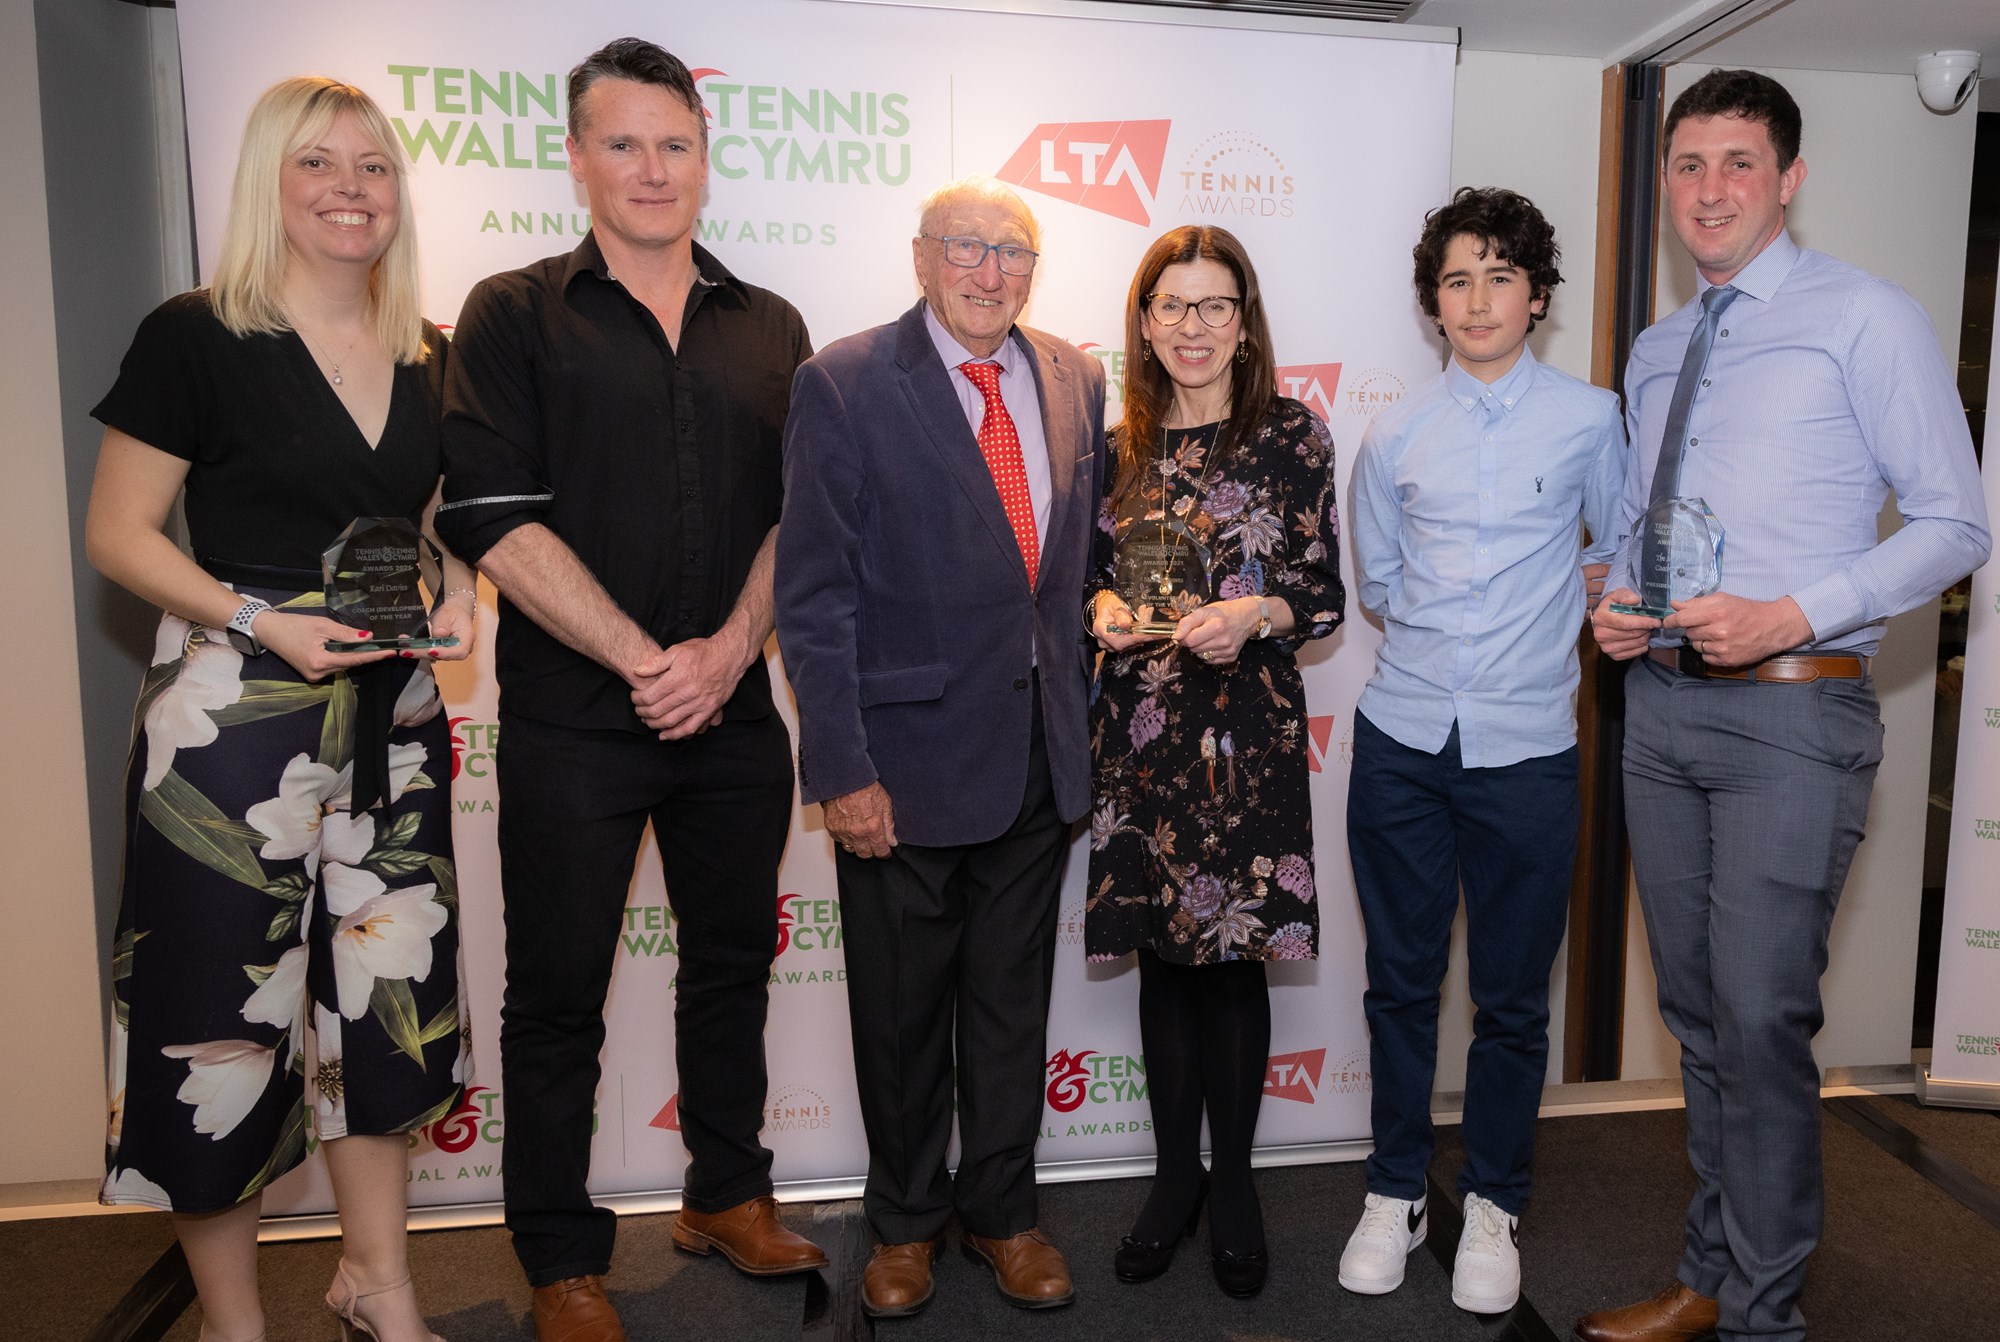 6 people posing for a picture at the disability tennis awards show